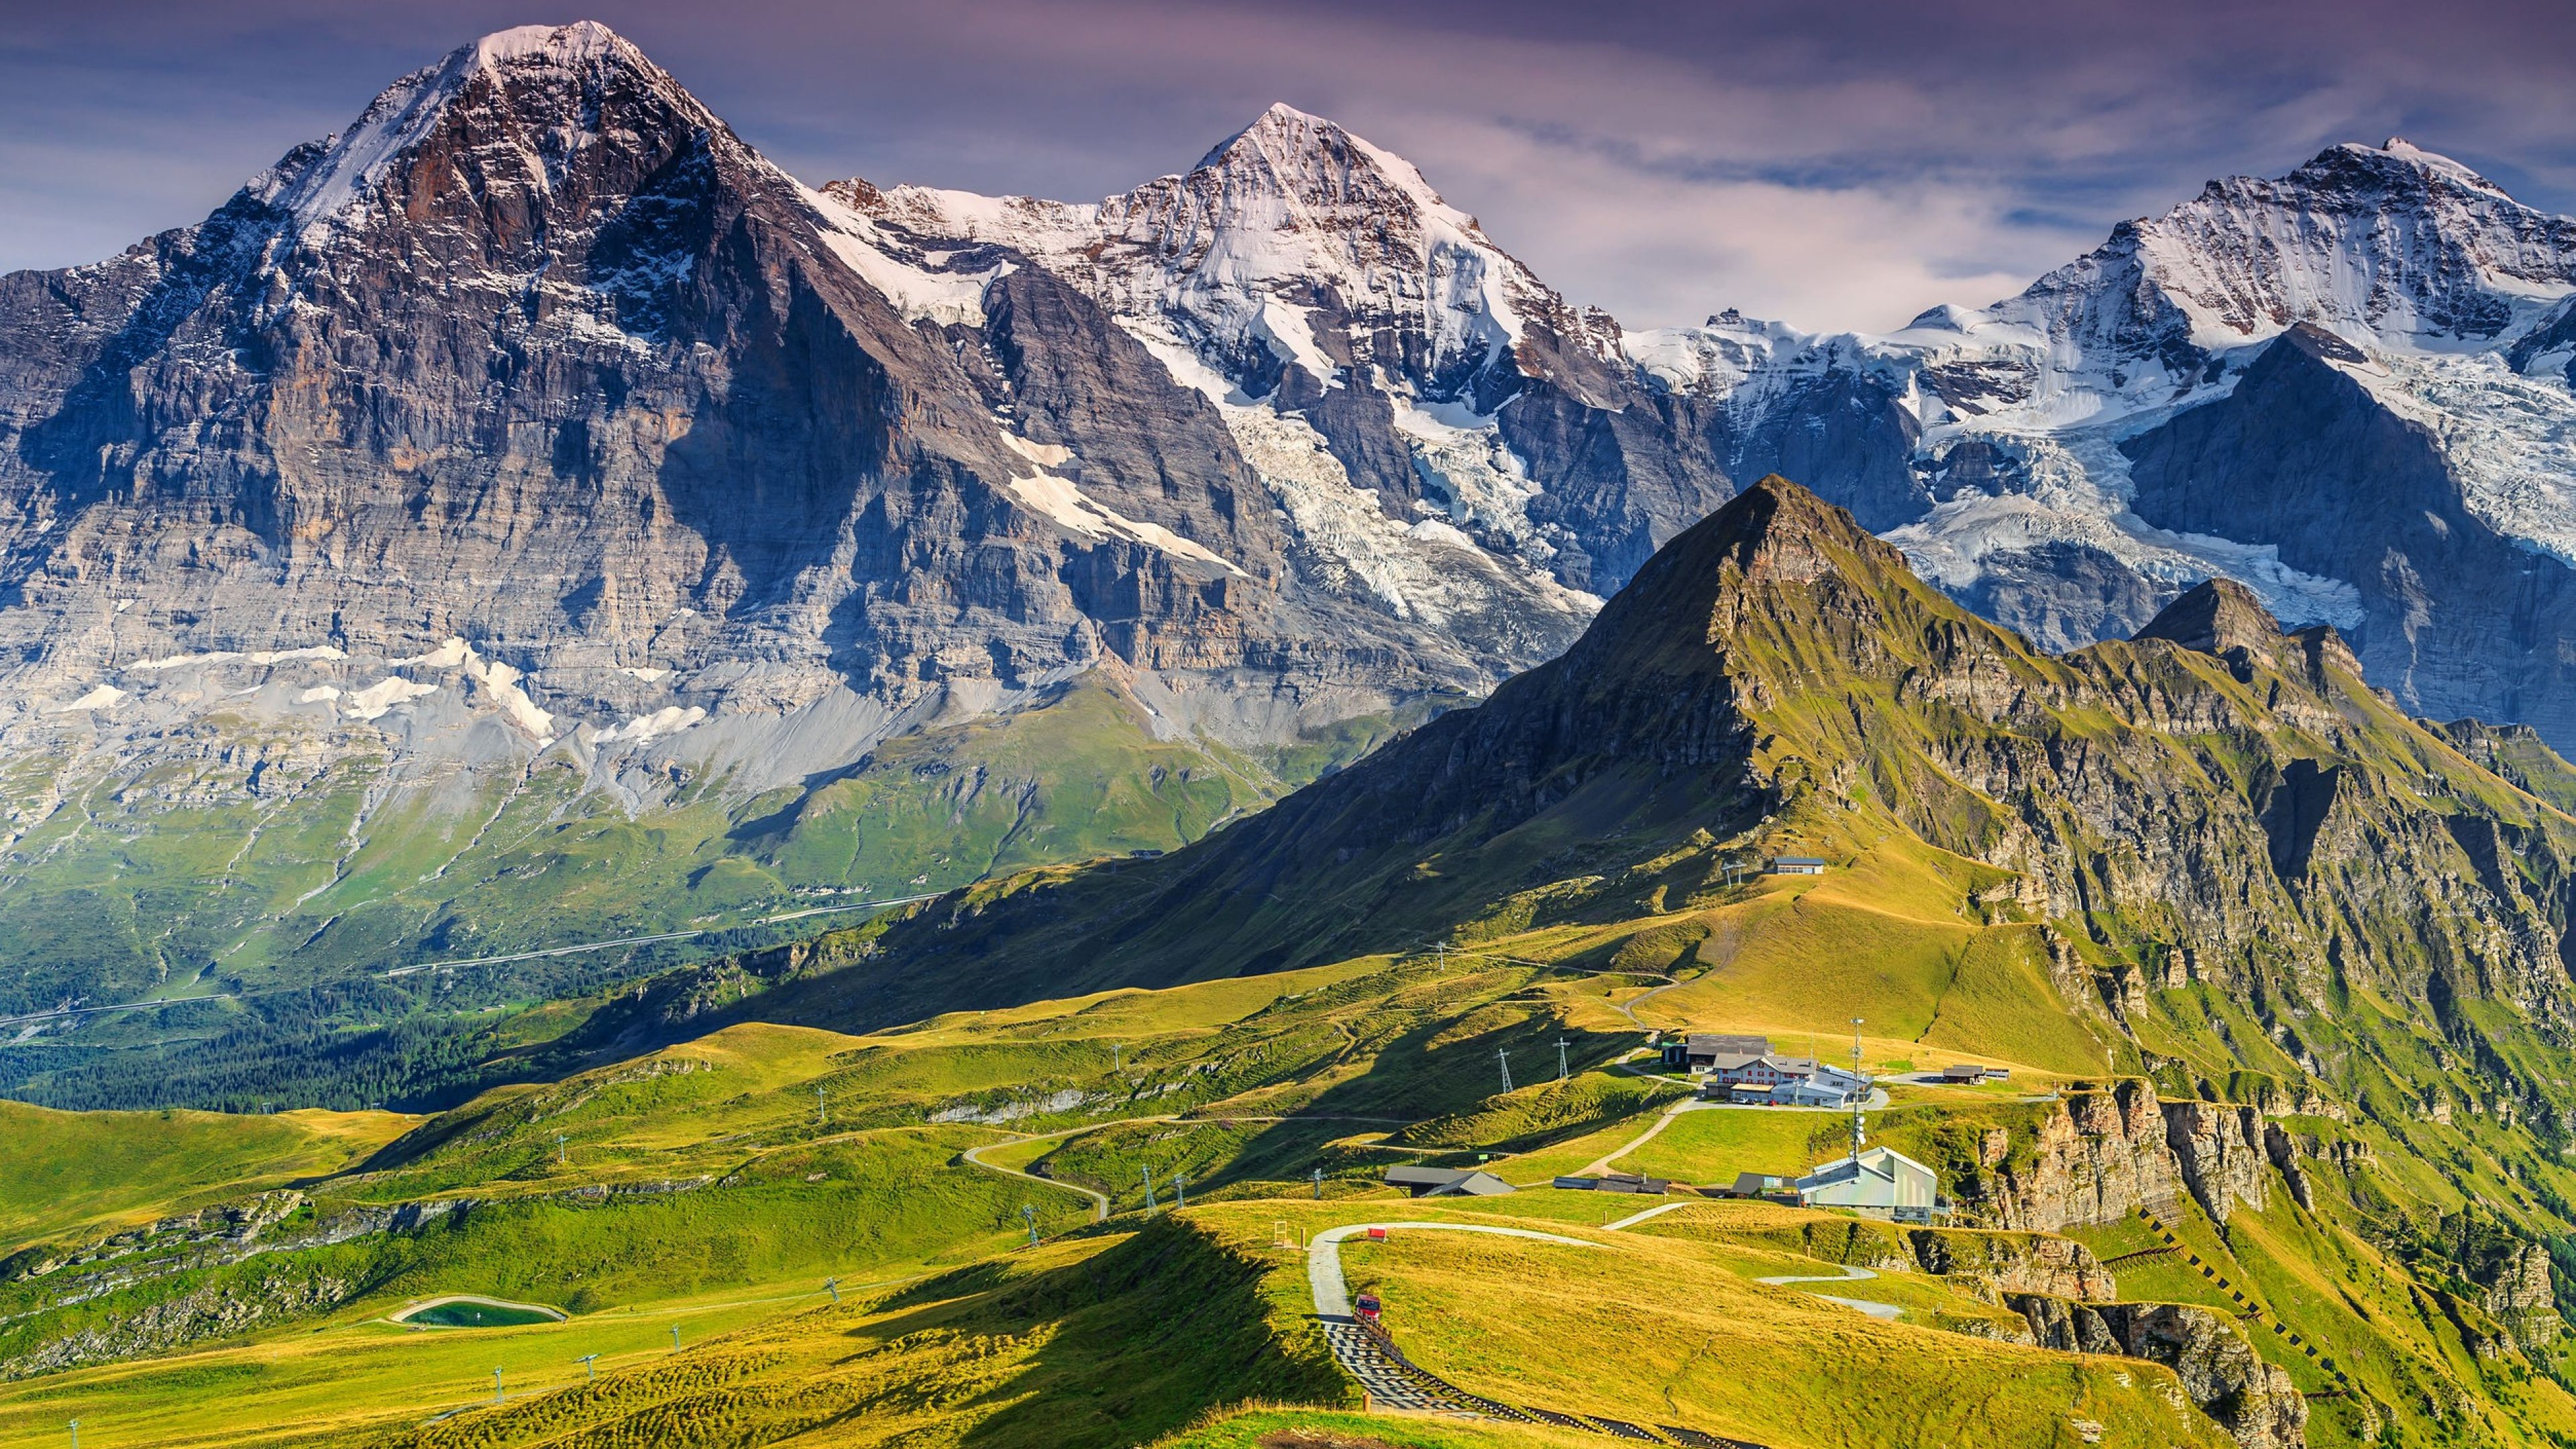 Stunning alpine panorama with Jungfrau,Monch,Eiger North face and Mannlichen cable car station,Grindelwald,Bernese Oberland,Switzerland,Europe